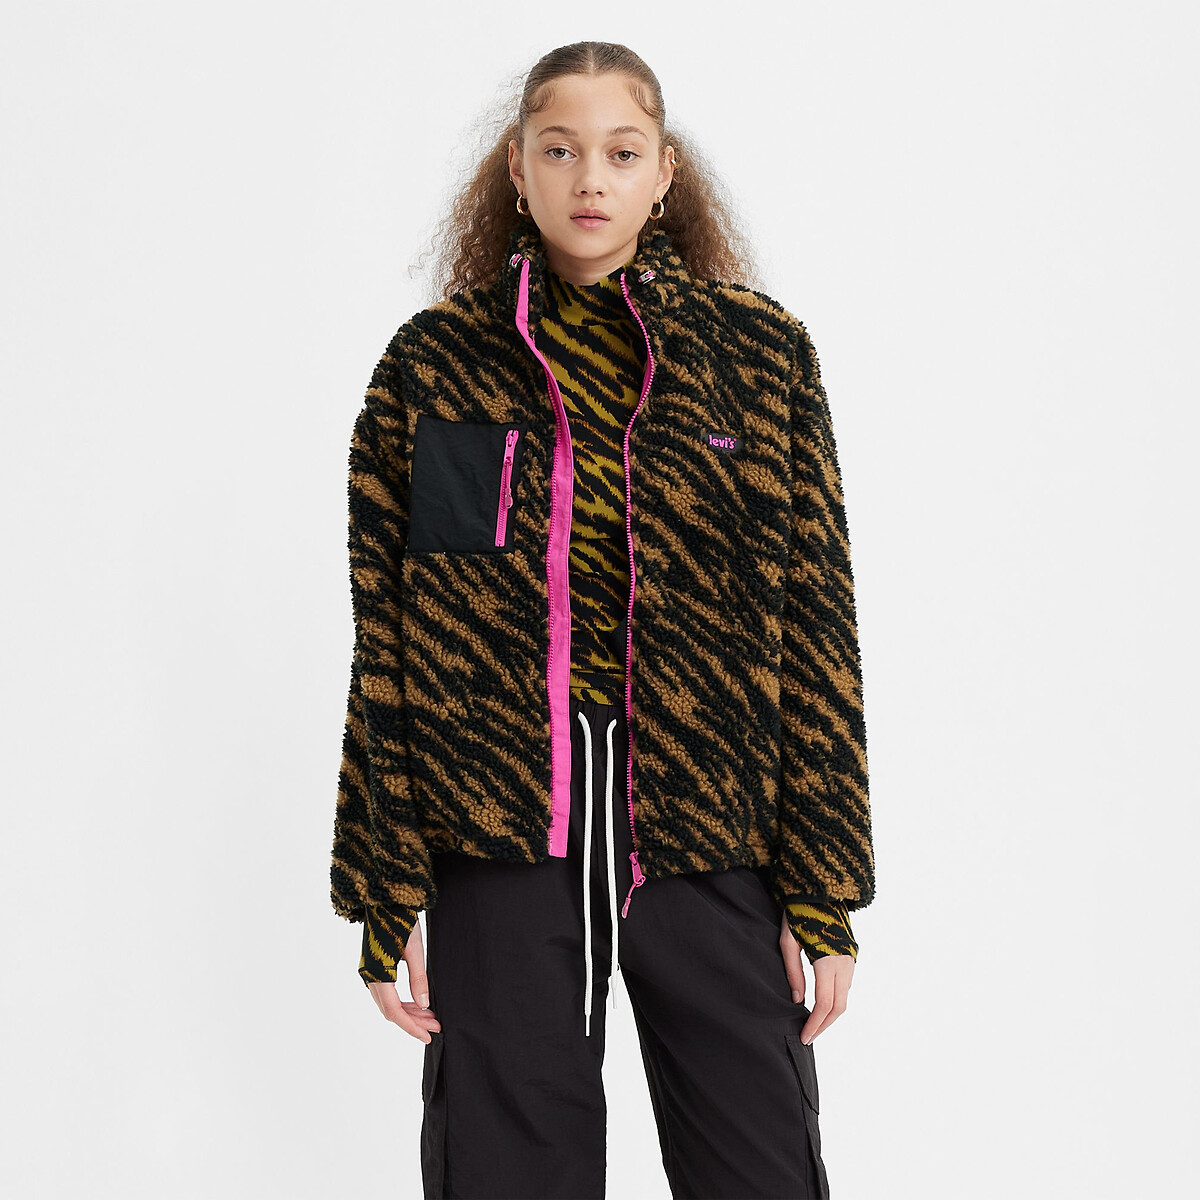 Image of Faux Fur Jacket in Animal Print with High Neck